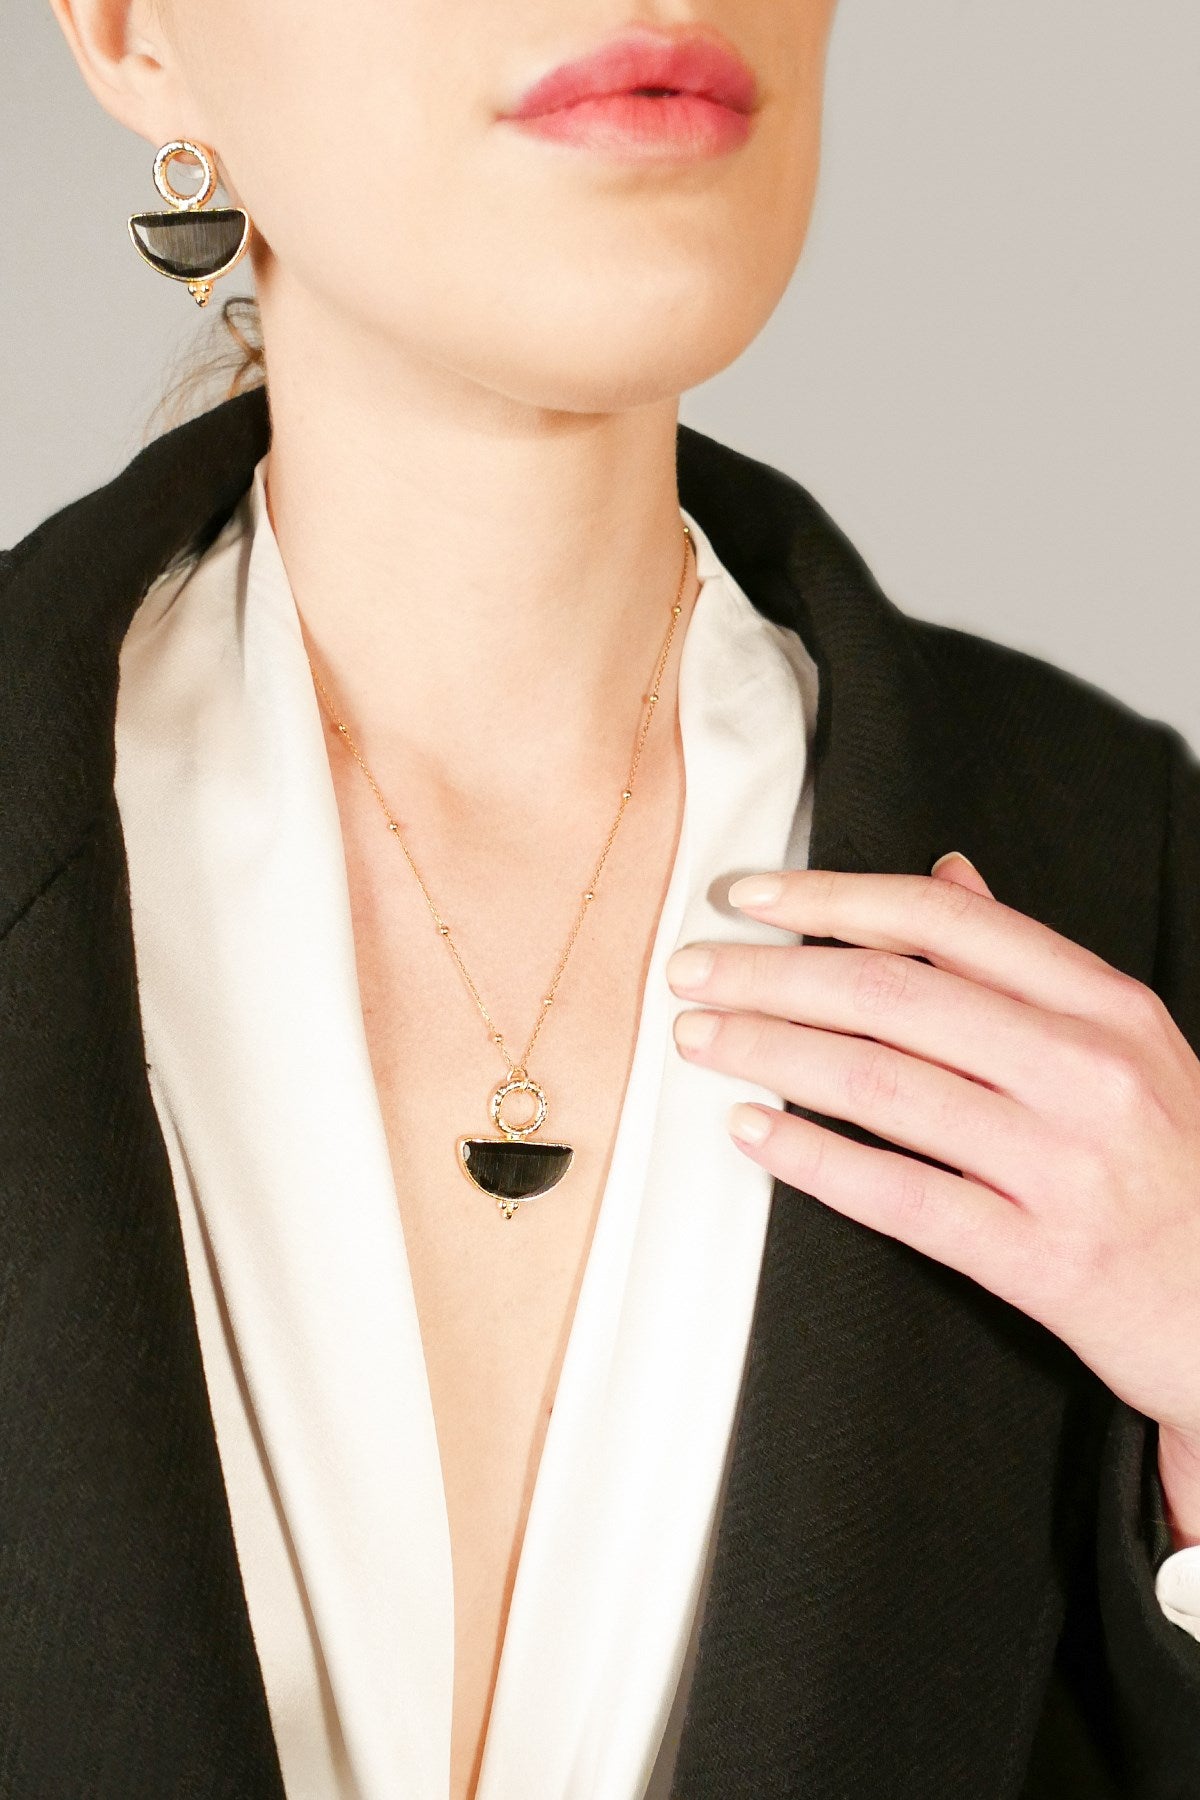 Black Cat's Eye Stone Geometric Necklace Gold Plated